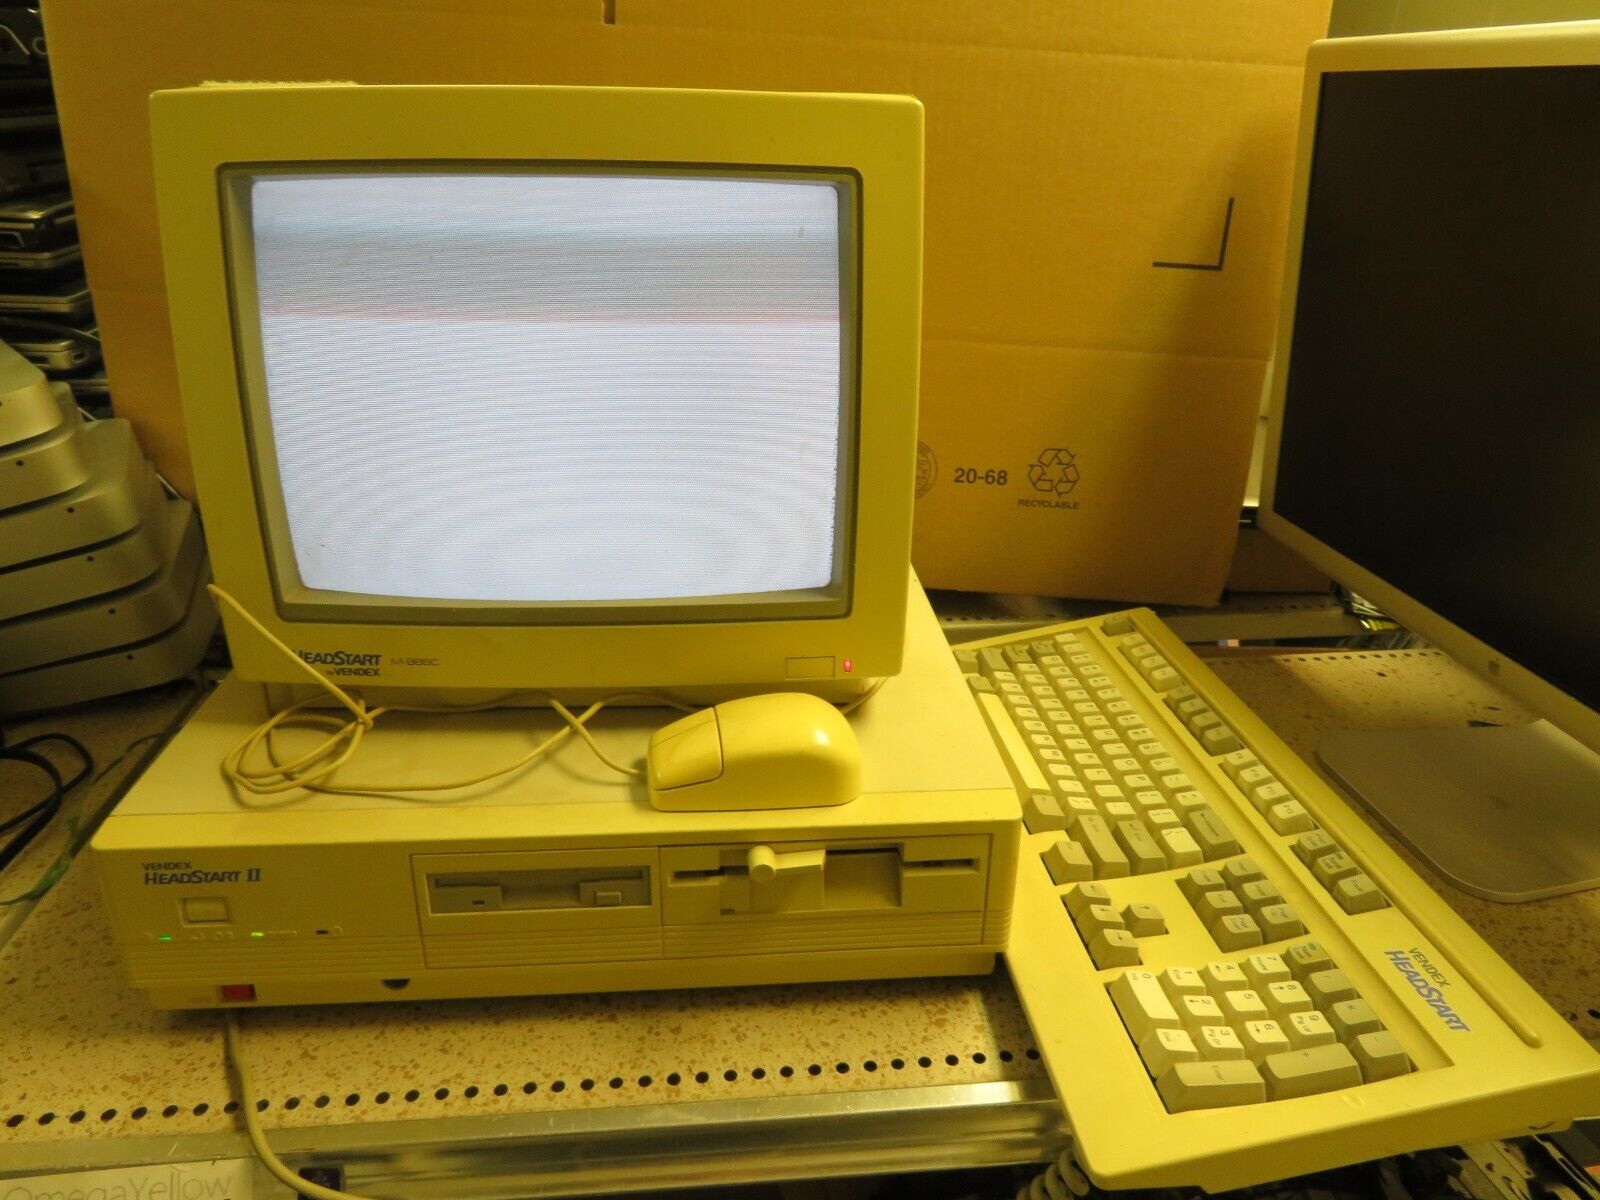 Very Rare Vendex Headstart II Computer + Keyboard Mouse CRT Monitor Powers On